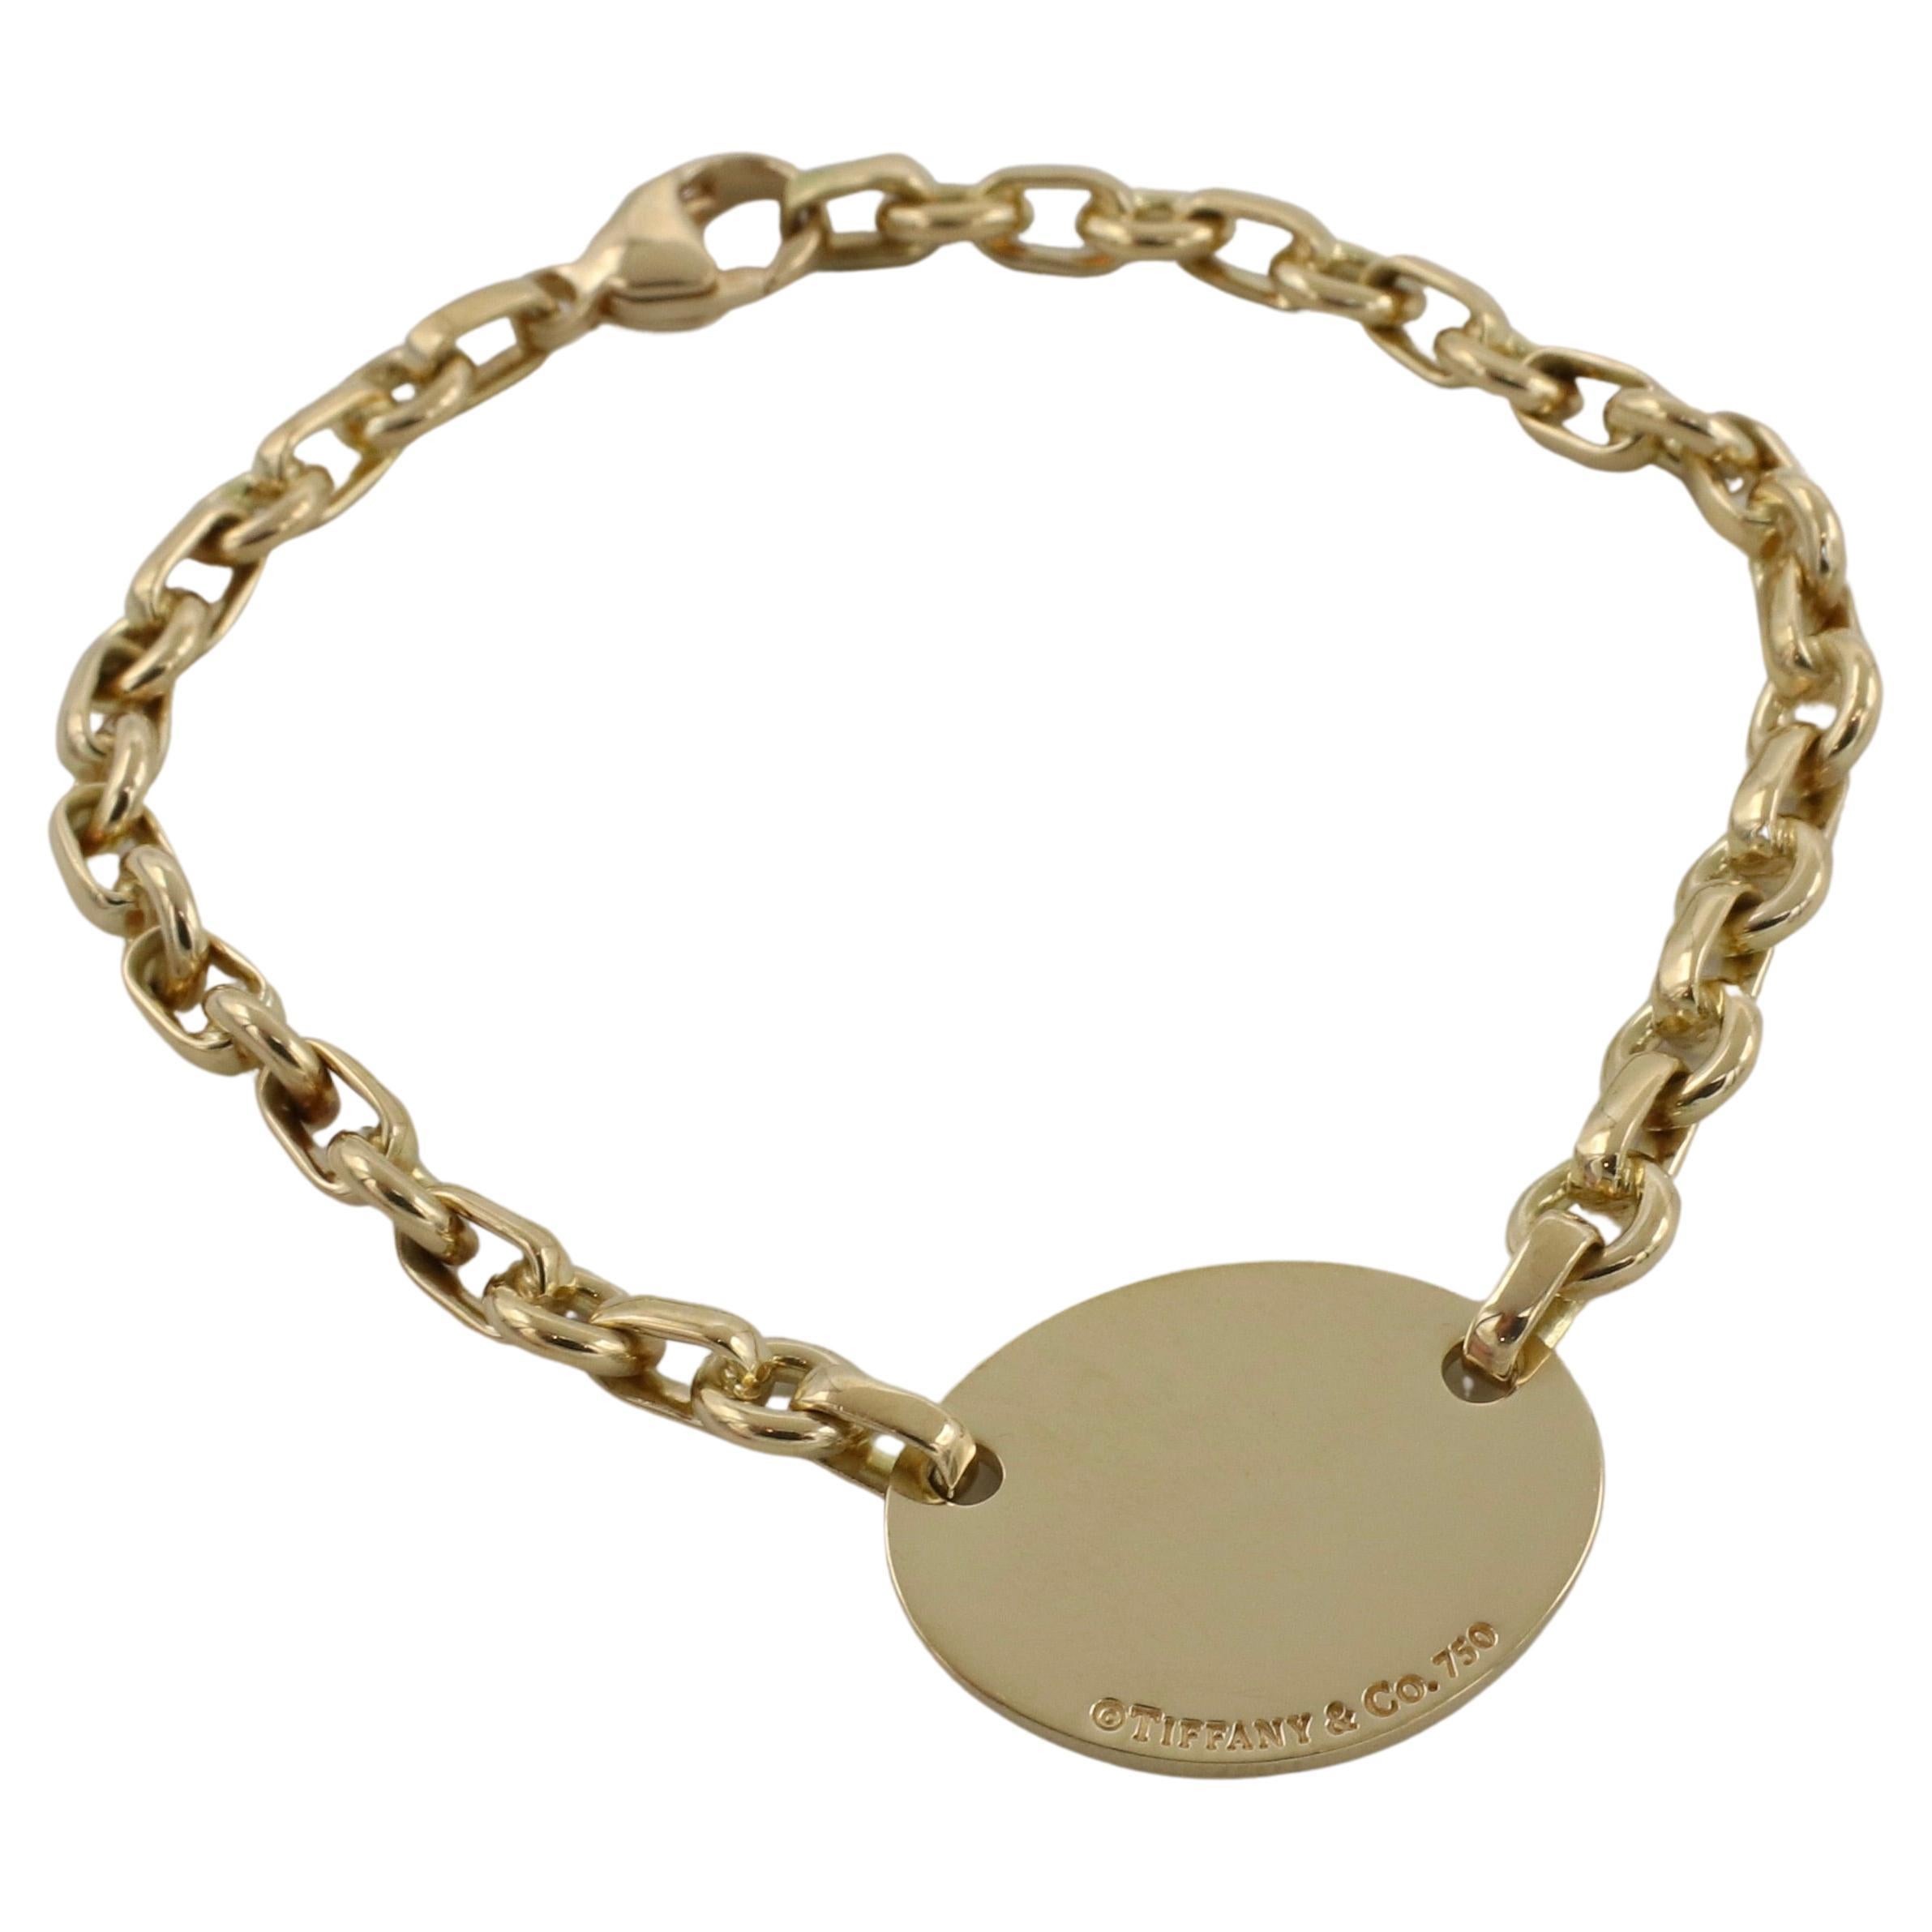 Tiffany & Co. Return To Tiffany 18 Karat Yellow Gold Chain Link Bracelet
Metal: 18k yellow gold
Weight: 20.5 grams
Length: 7 inches
Tag: 22.5 x 18mm
Signed: PLEASE RETURN TO TIFFANY & CO. NEW YORK 750 ©TIFFANY & CO. 750
Links: 6mm
